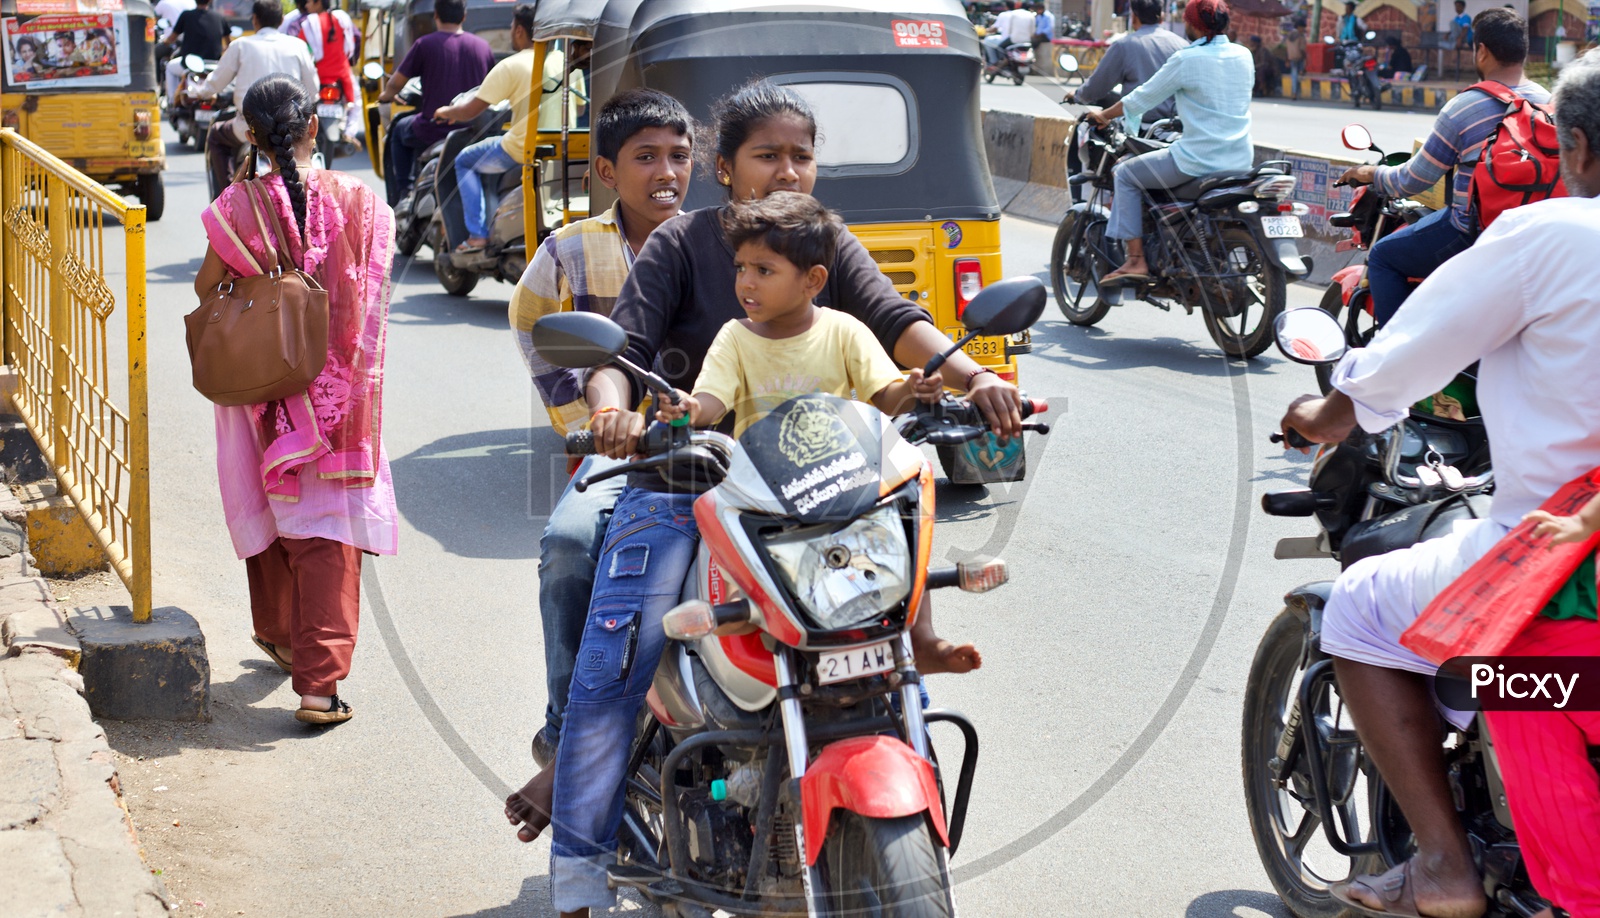 Girl riding a geared motor cycle with 3 members on the bike and riding against the traffic.